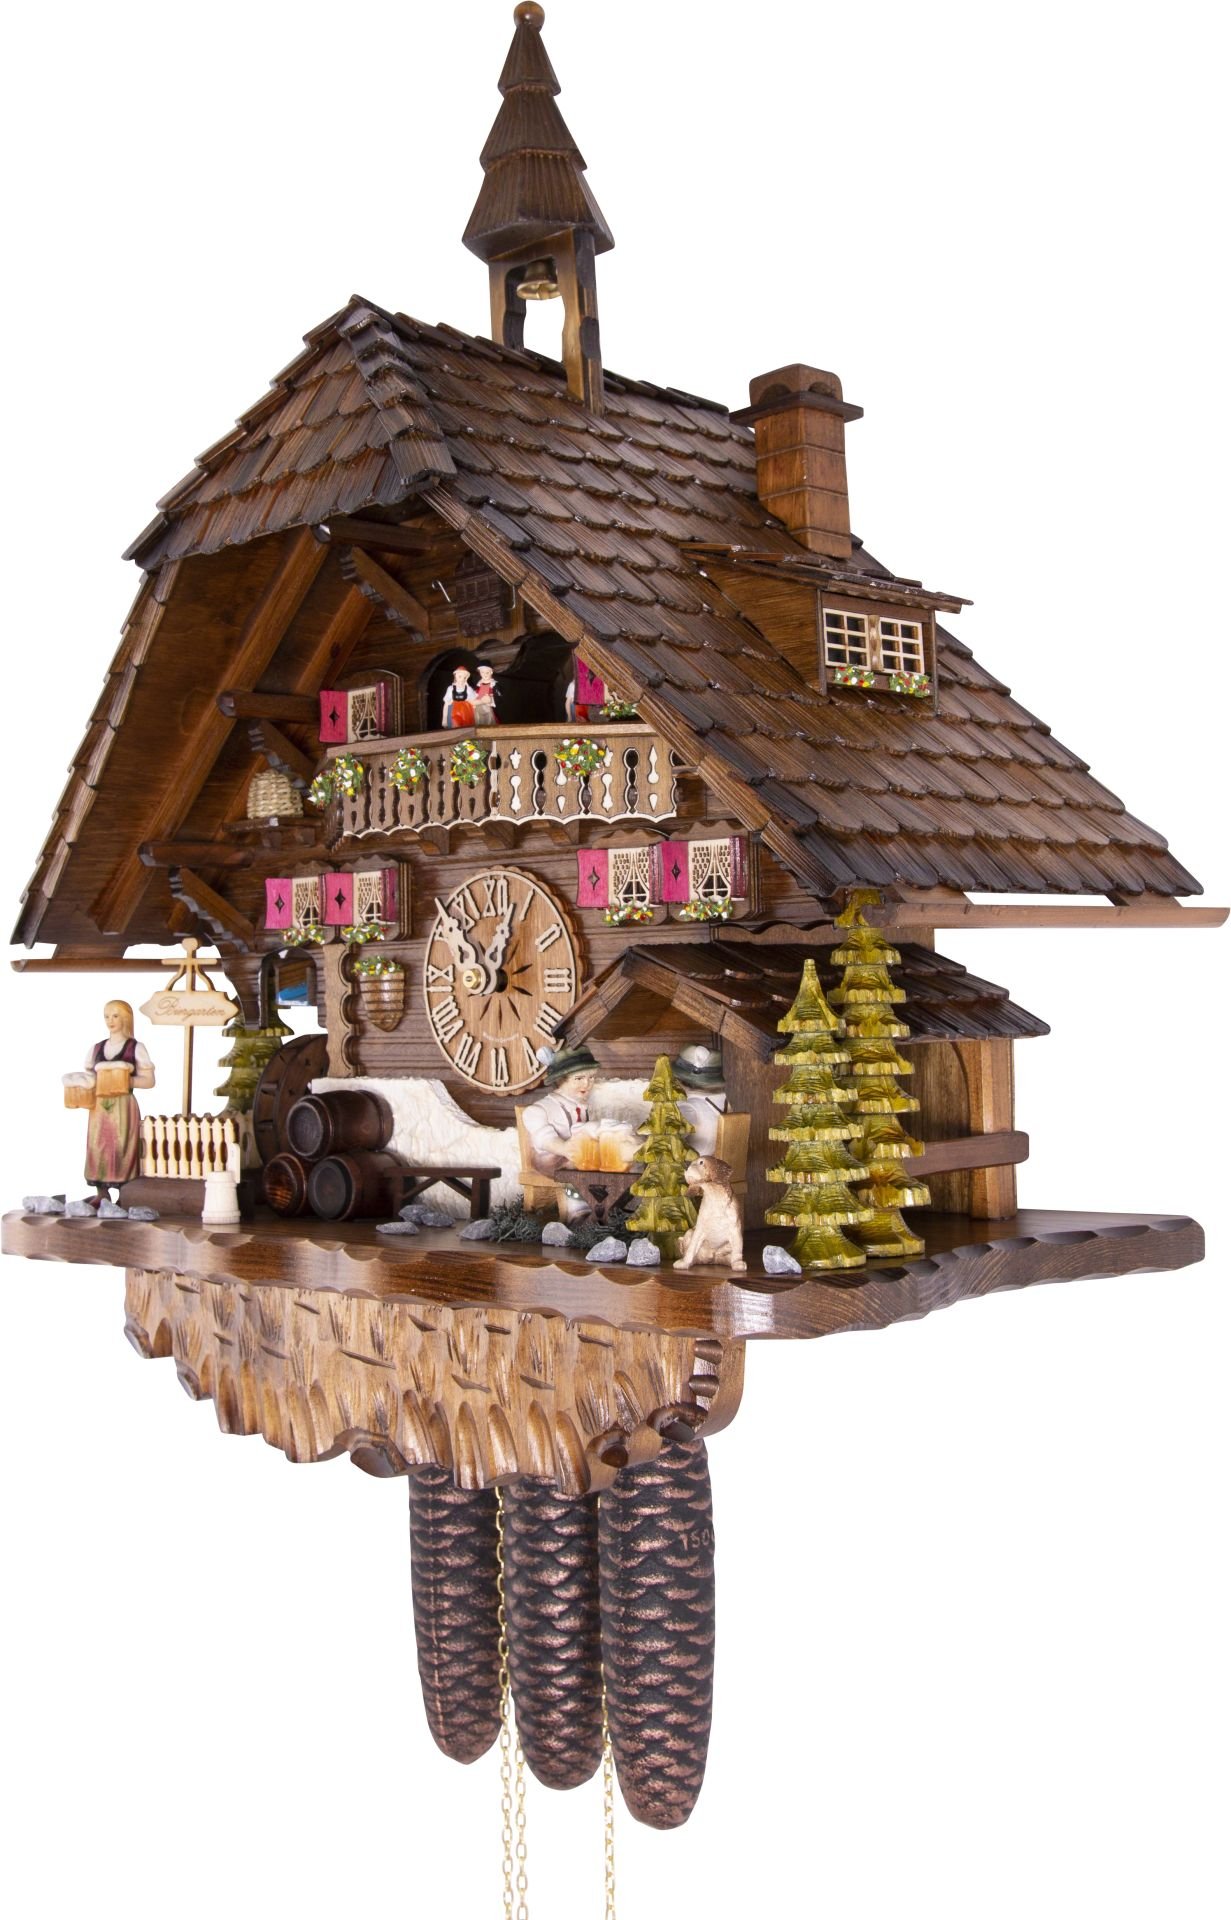 Cuckoo Clock Chalet Style 8 Day Movement 60cm by Hekas